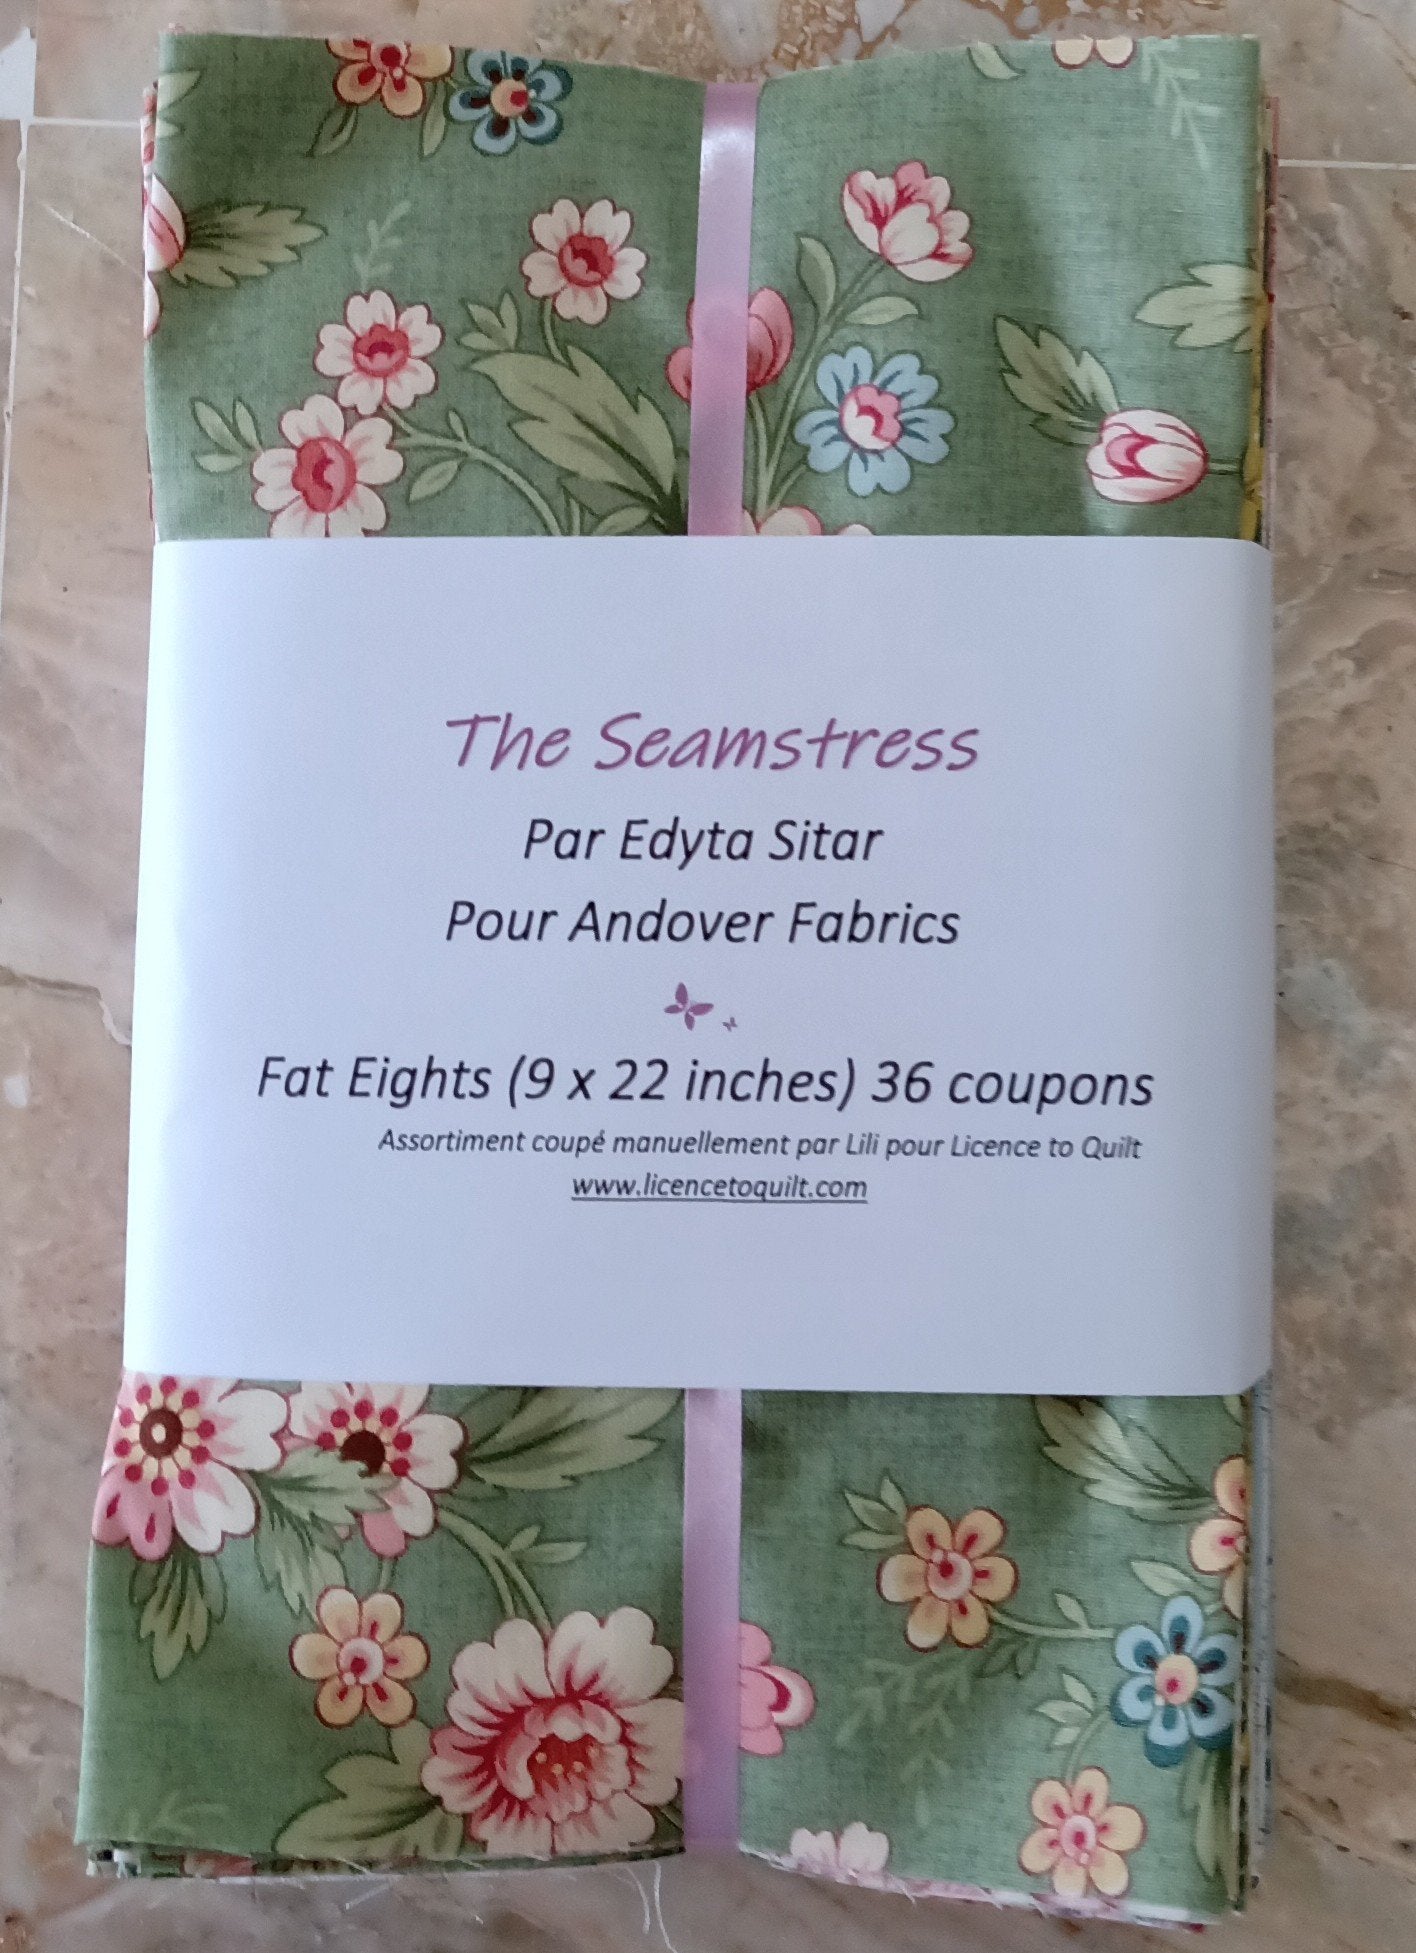 The Seamstress - Fat Eights (36) - Licence To Quilt